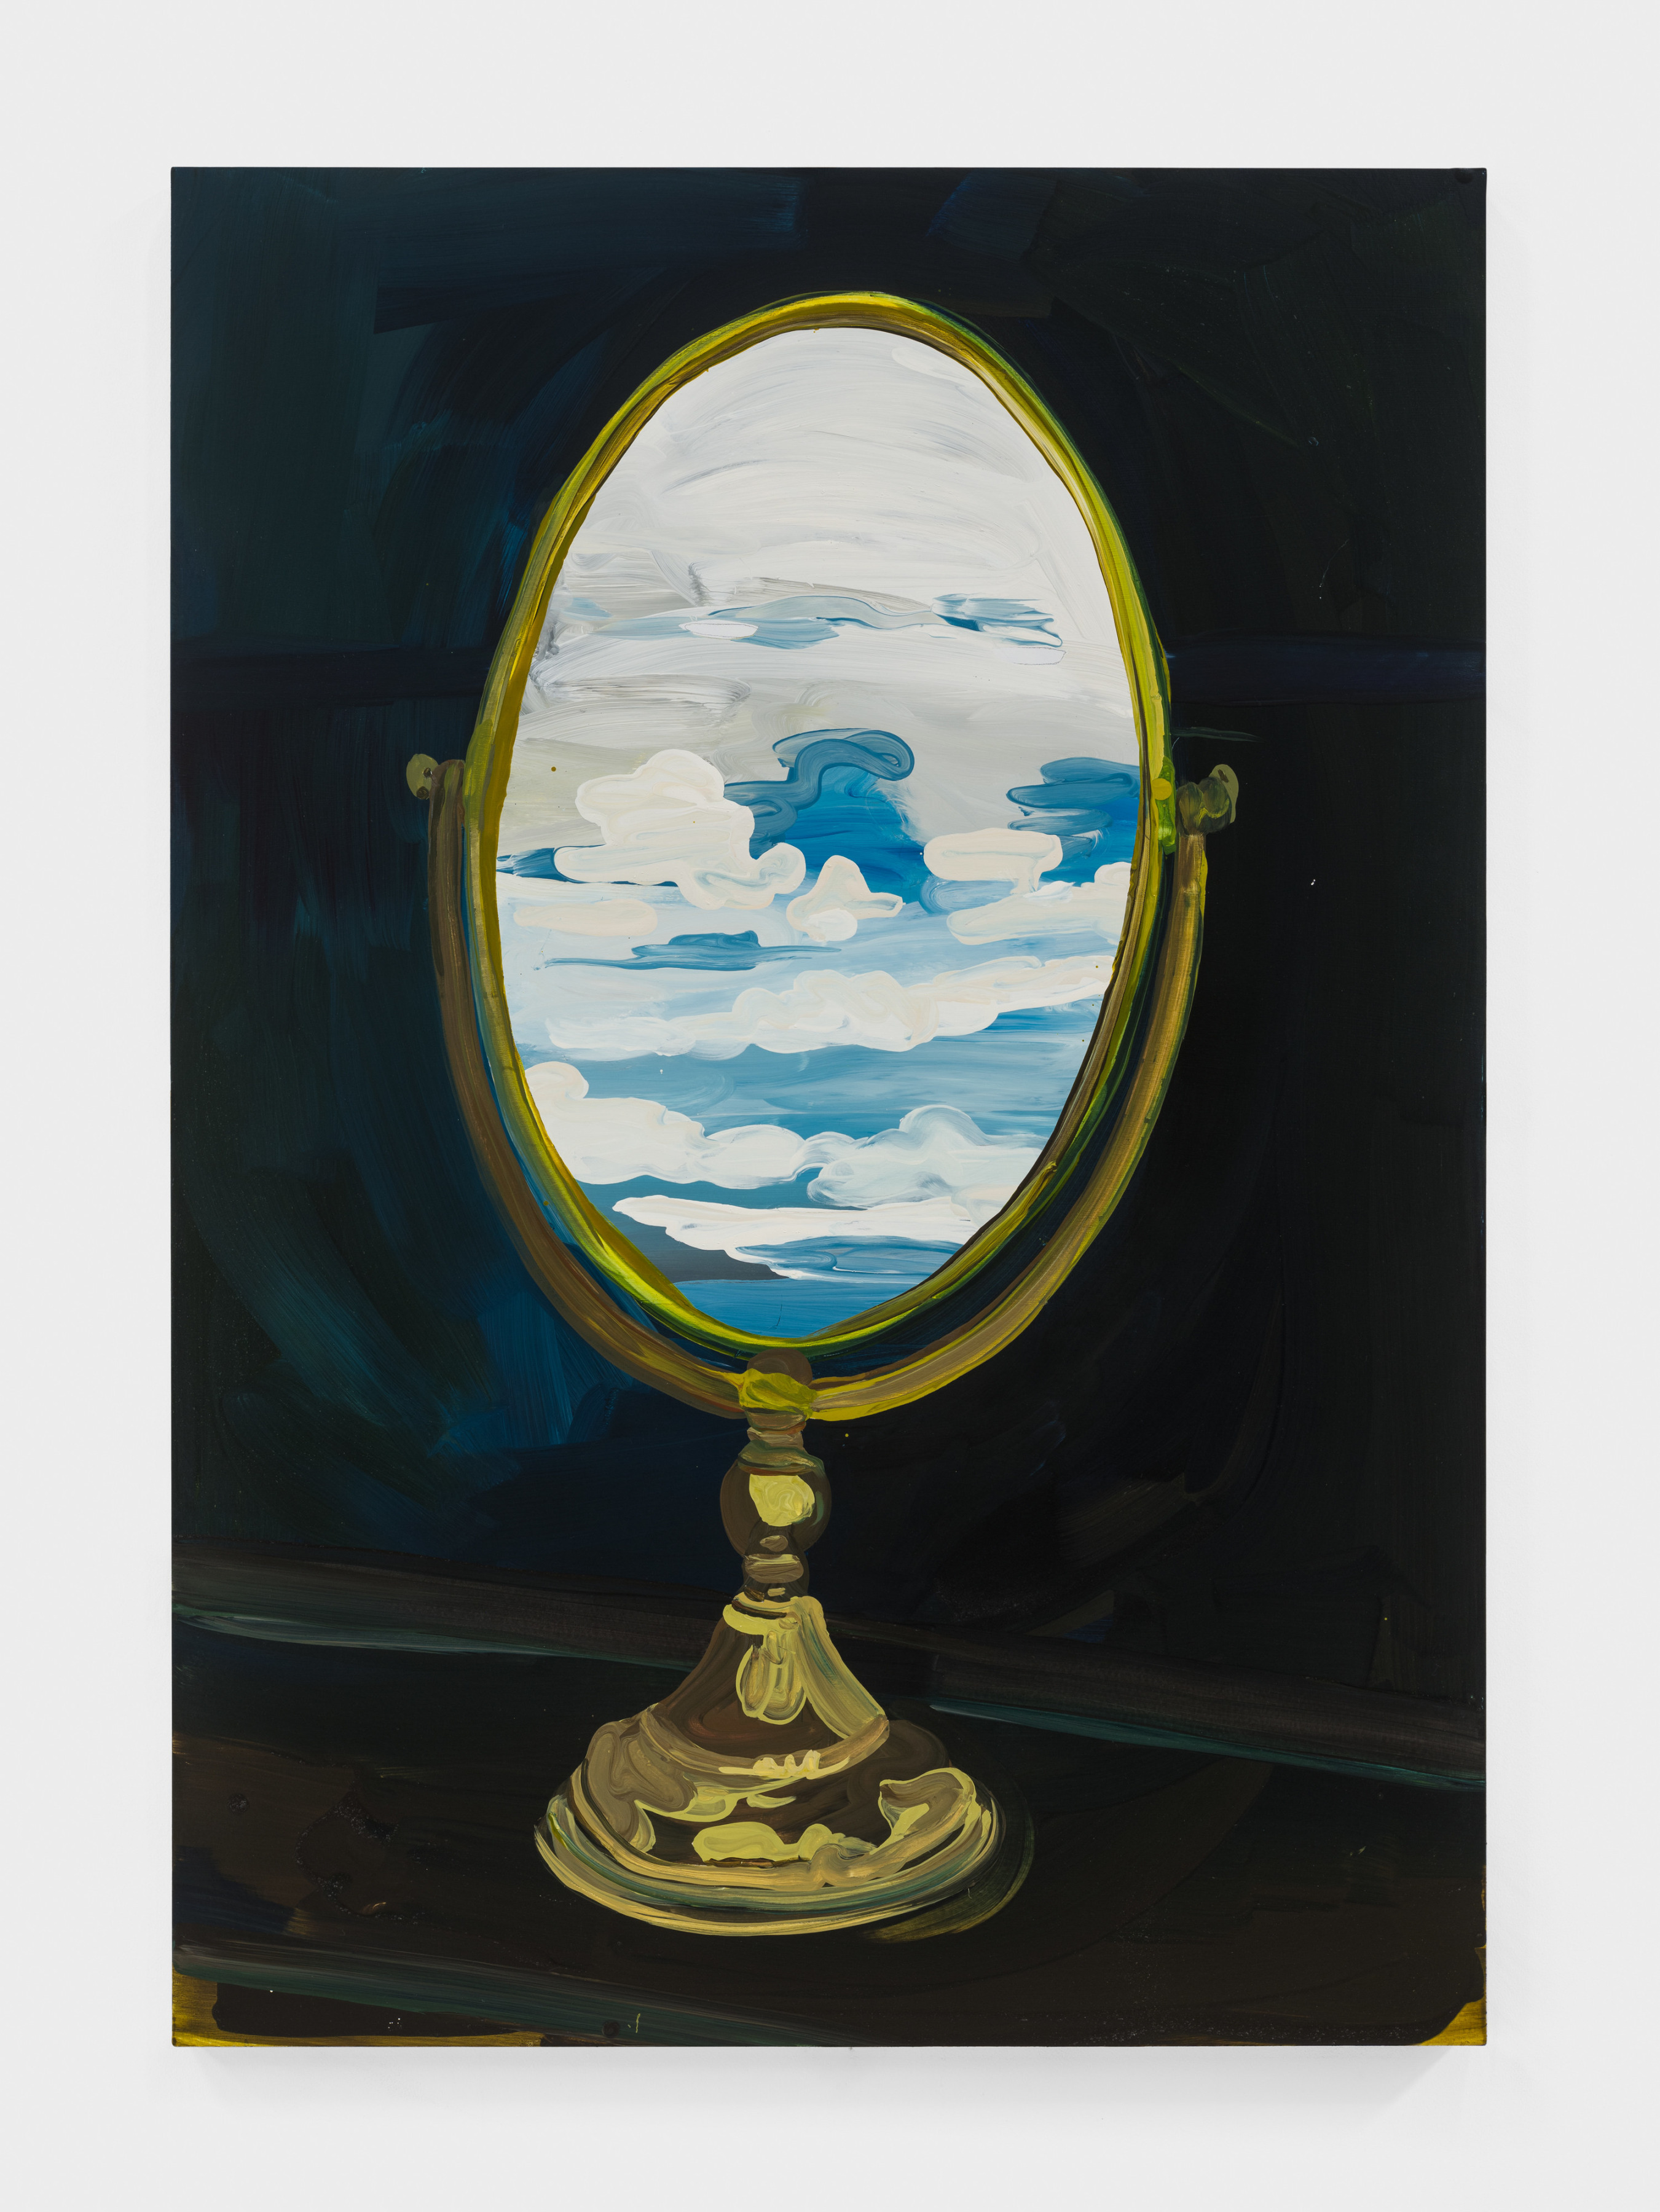 A vanity mirror sits titled and reflects a blue cloudy sky.